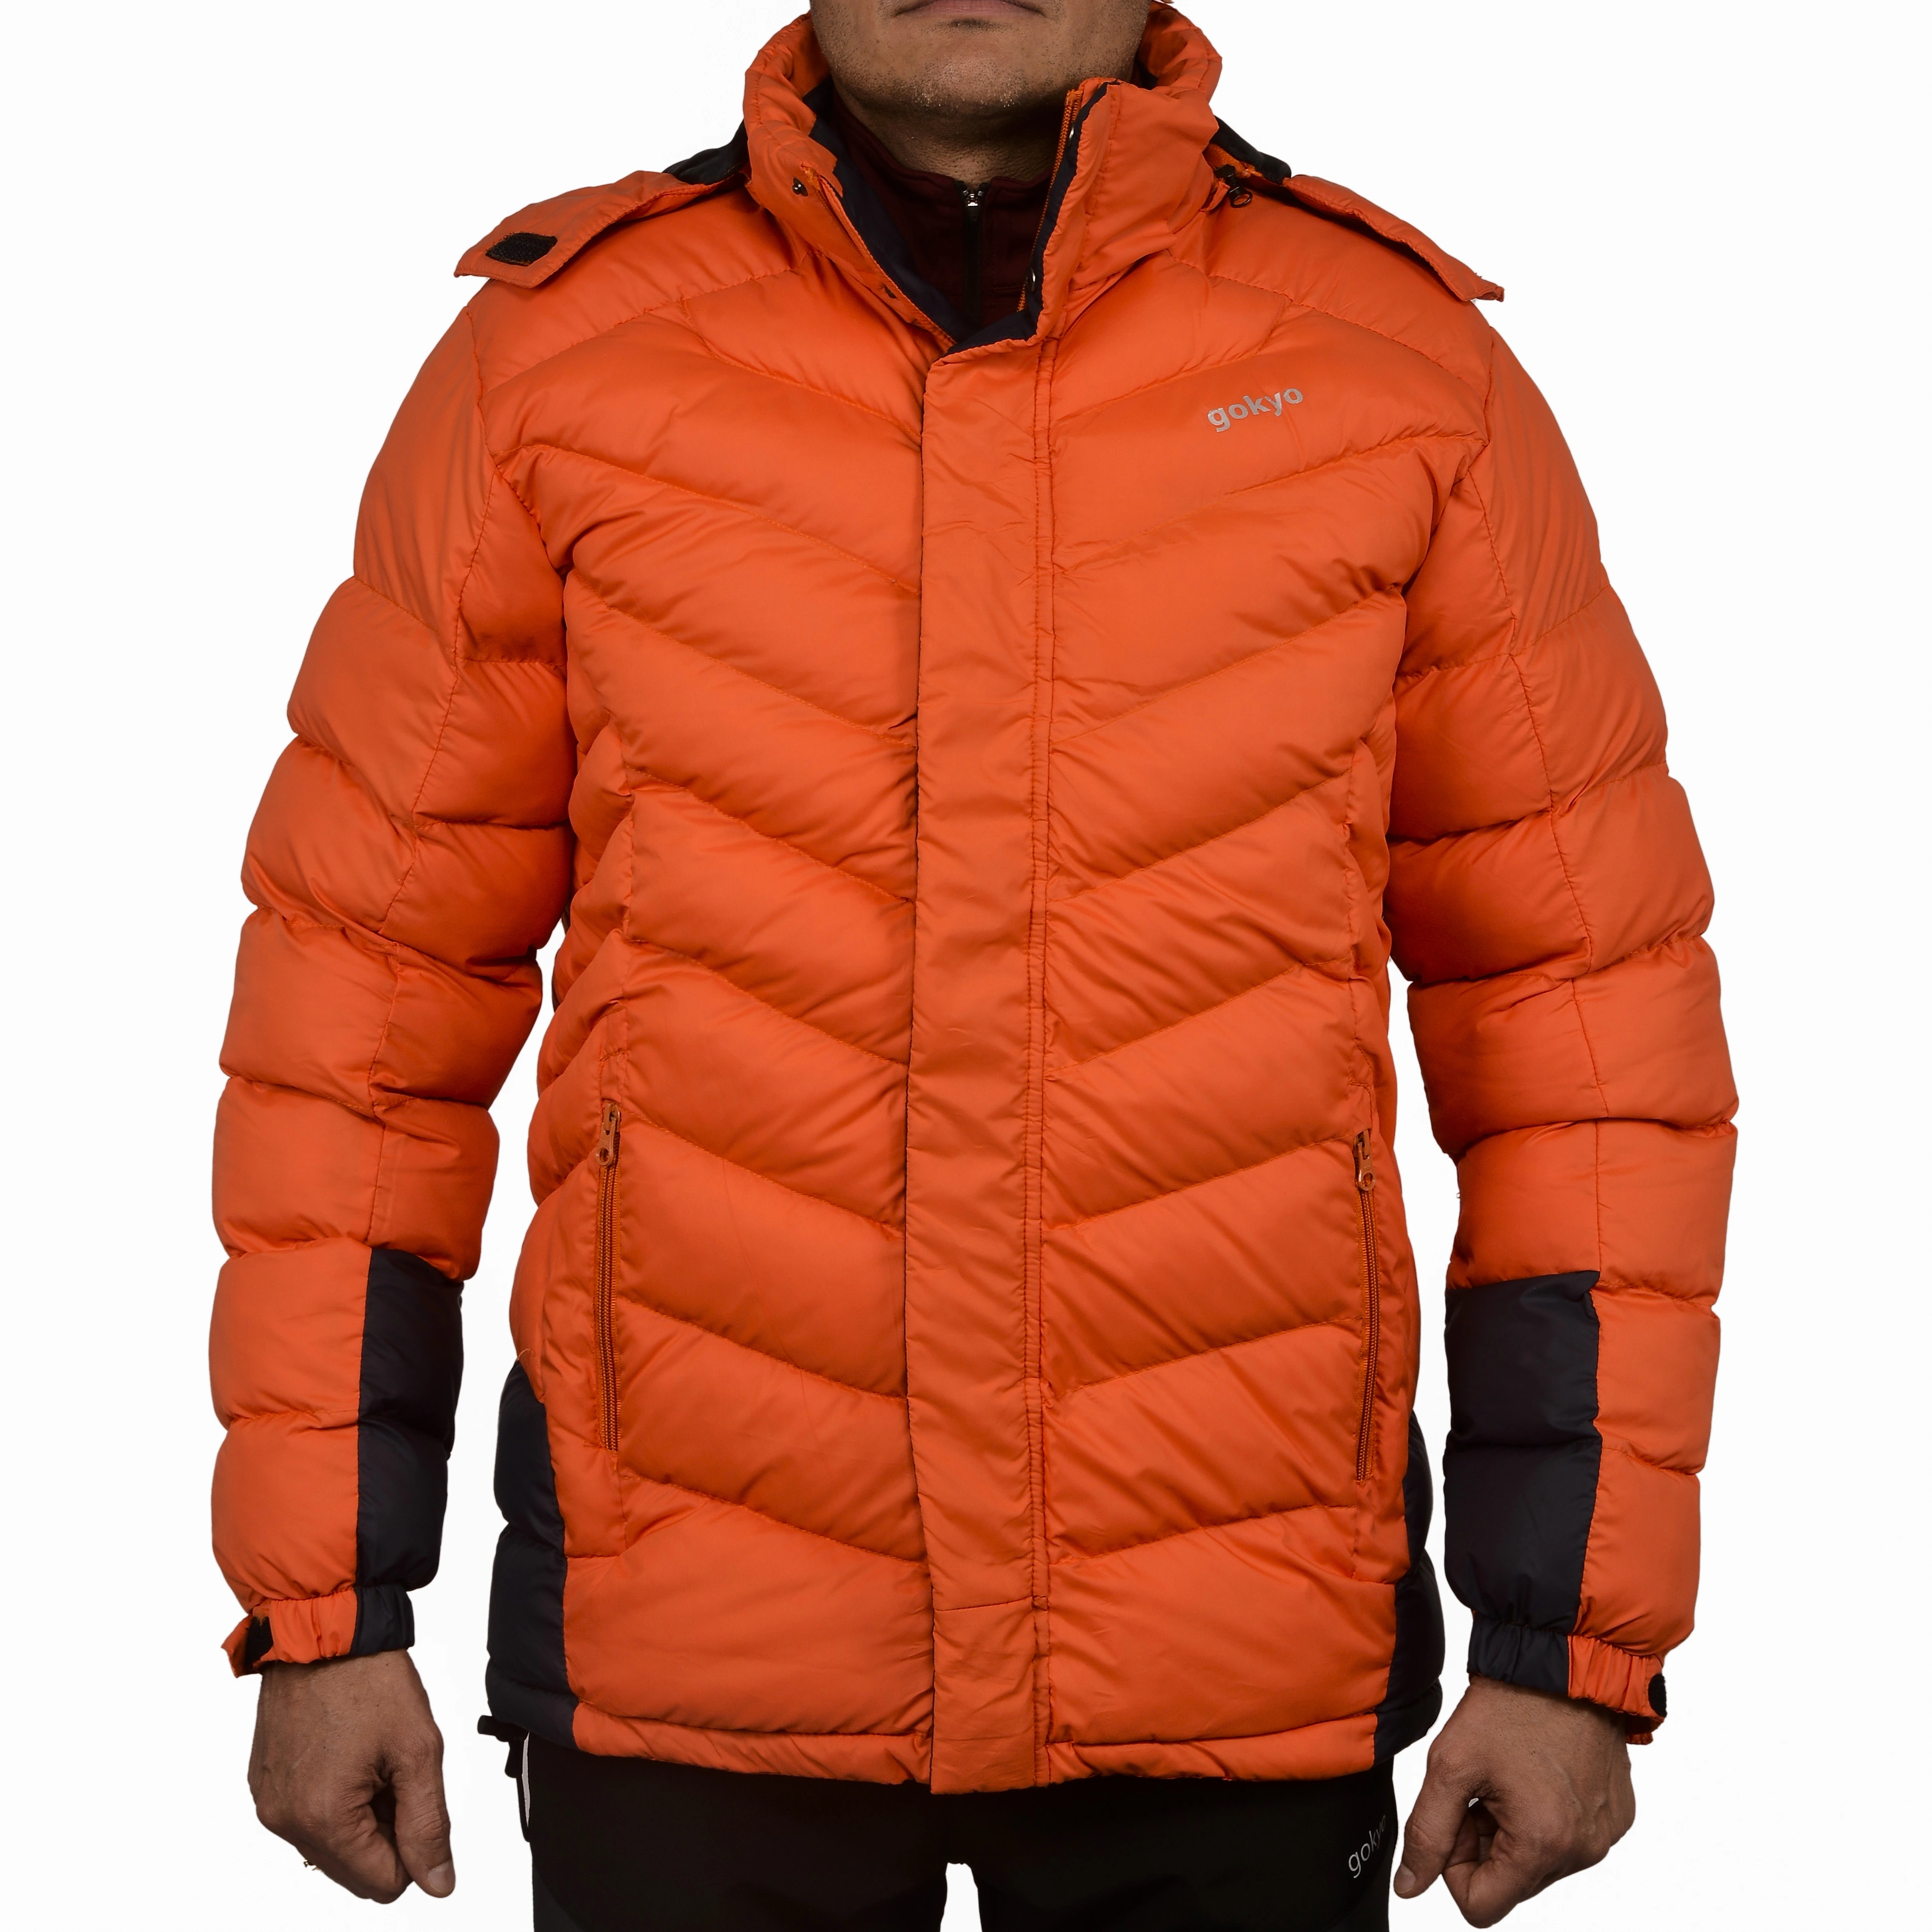 K2 Survivor Down Jacket for Men: Stylized Functionality for Extreme Cold Weather Expeditions (Up to -20°C)-230212